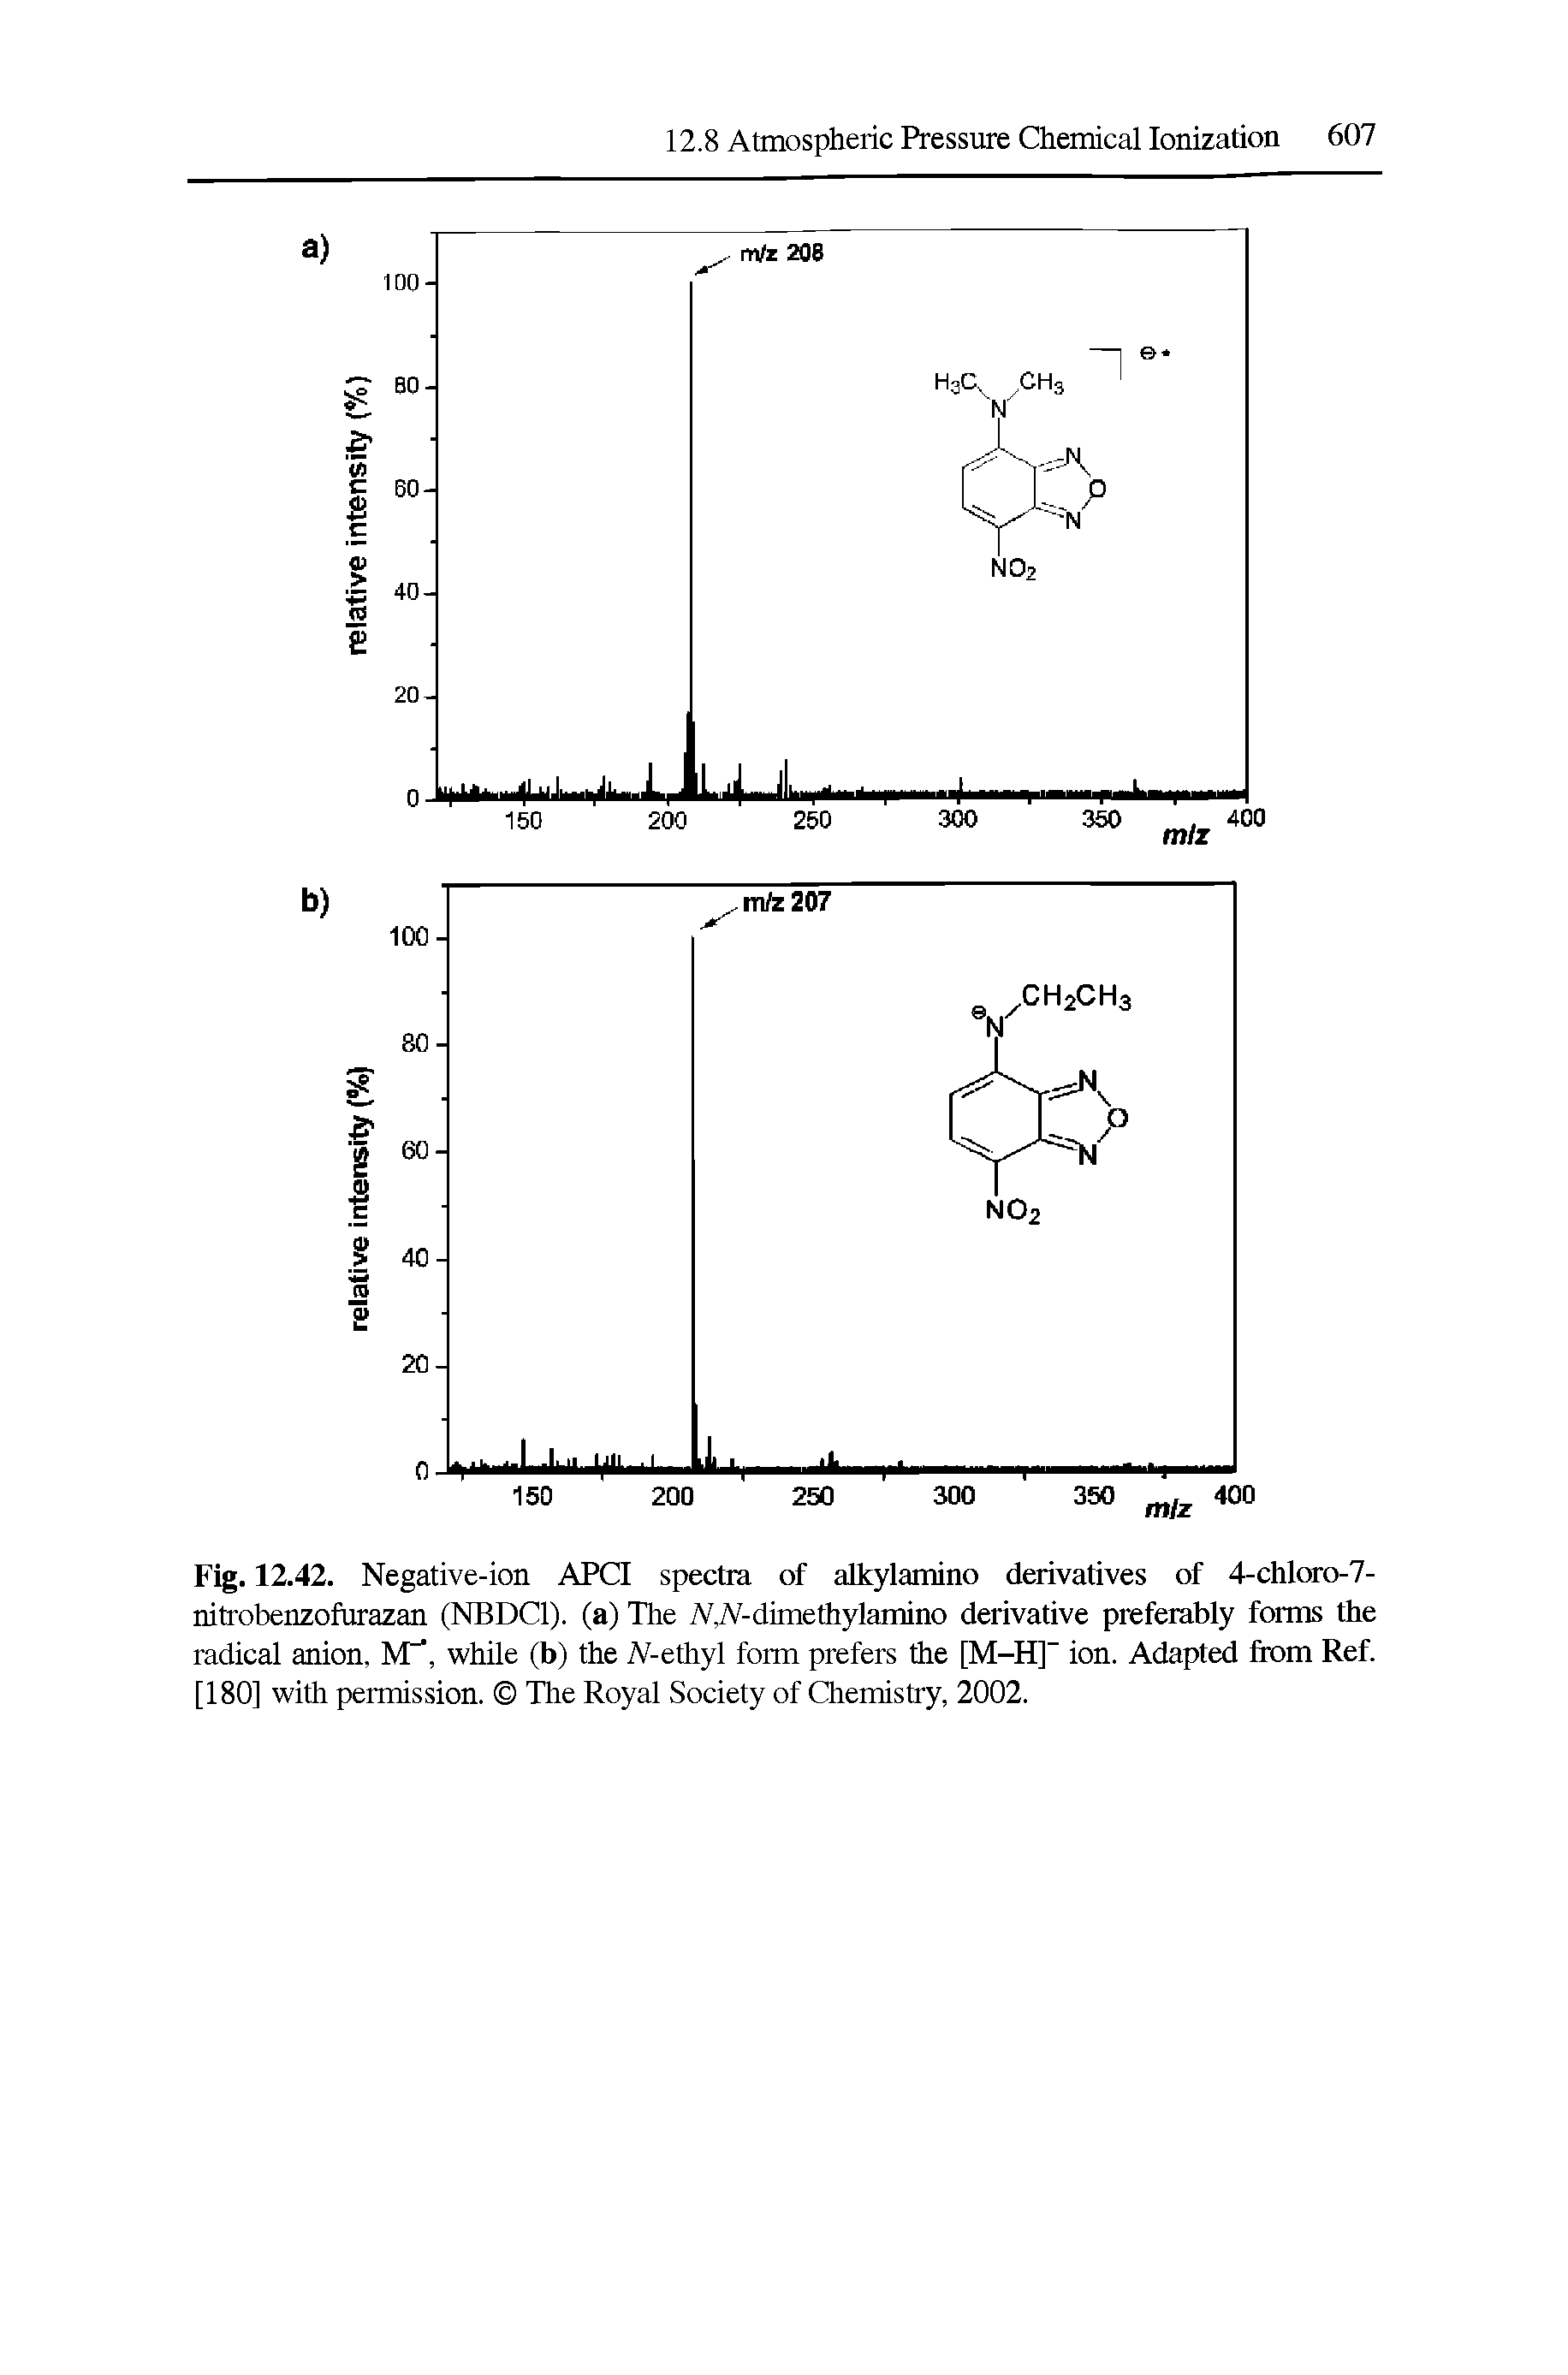 Fig. 12.42. Negative-ion APC3 spectra of alkylamino derivatives of 4-chloro-7-nitrobenzofurazan (NBDCl). (a) The N,N-dunethylamino derivative preferably forms the radical anion, hf, while (b) the N-ethyl form prefers the [M-H]" ion. Adapted fiom Ref. [180] with permission. The Royal Society of Chemistry, 2002.